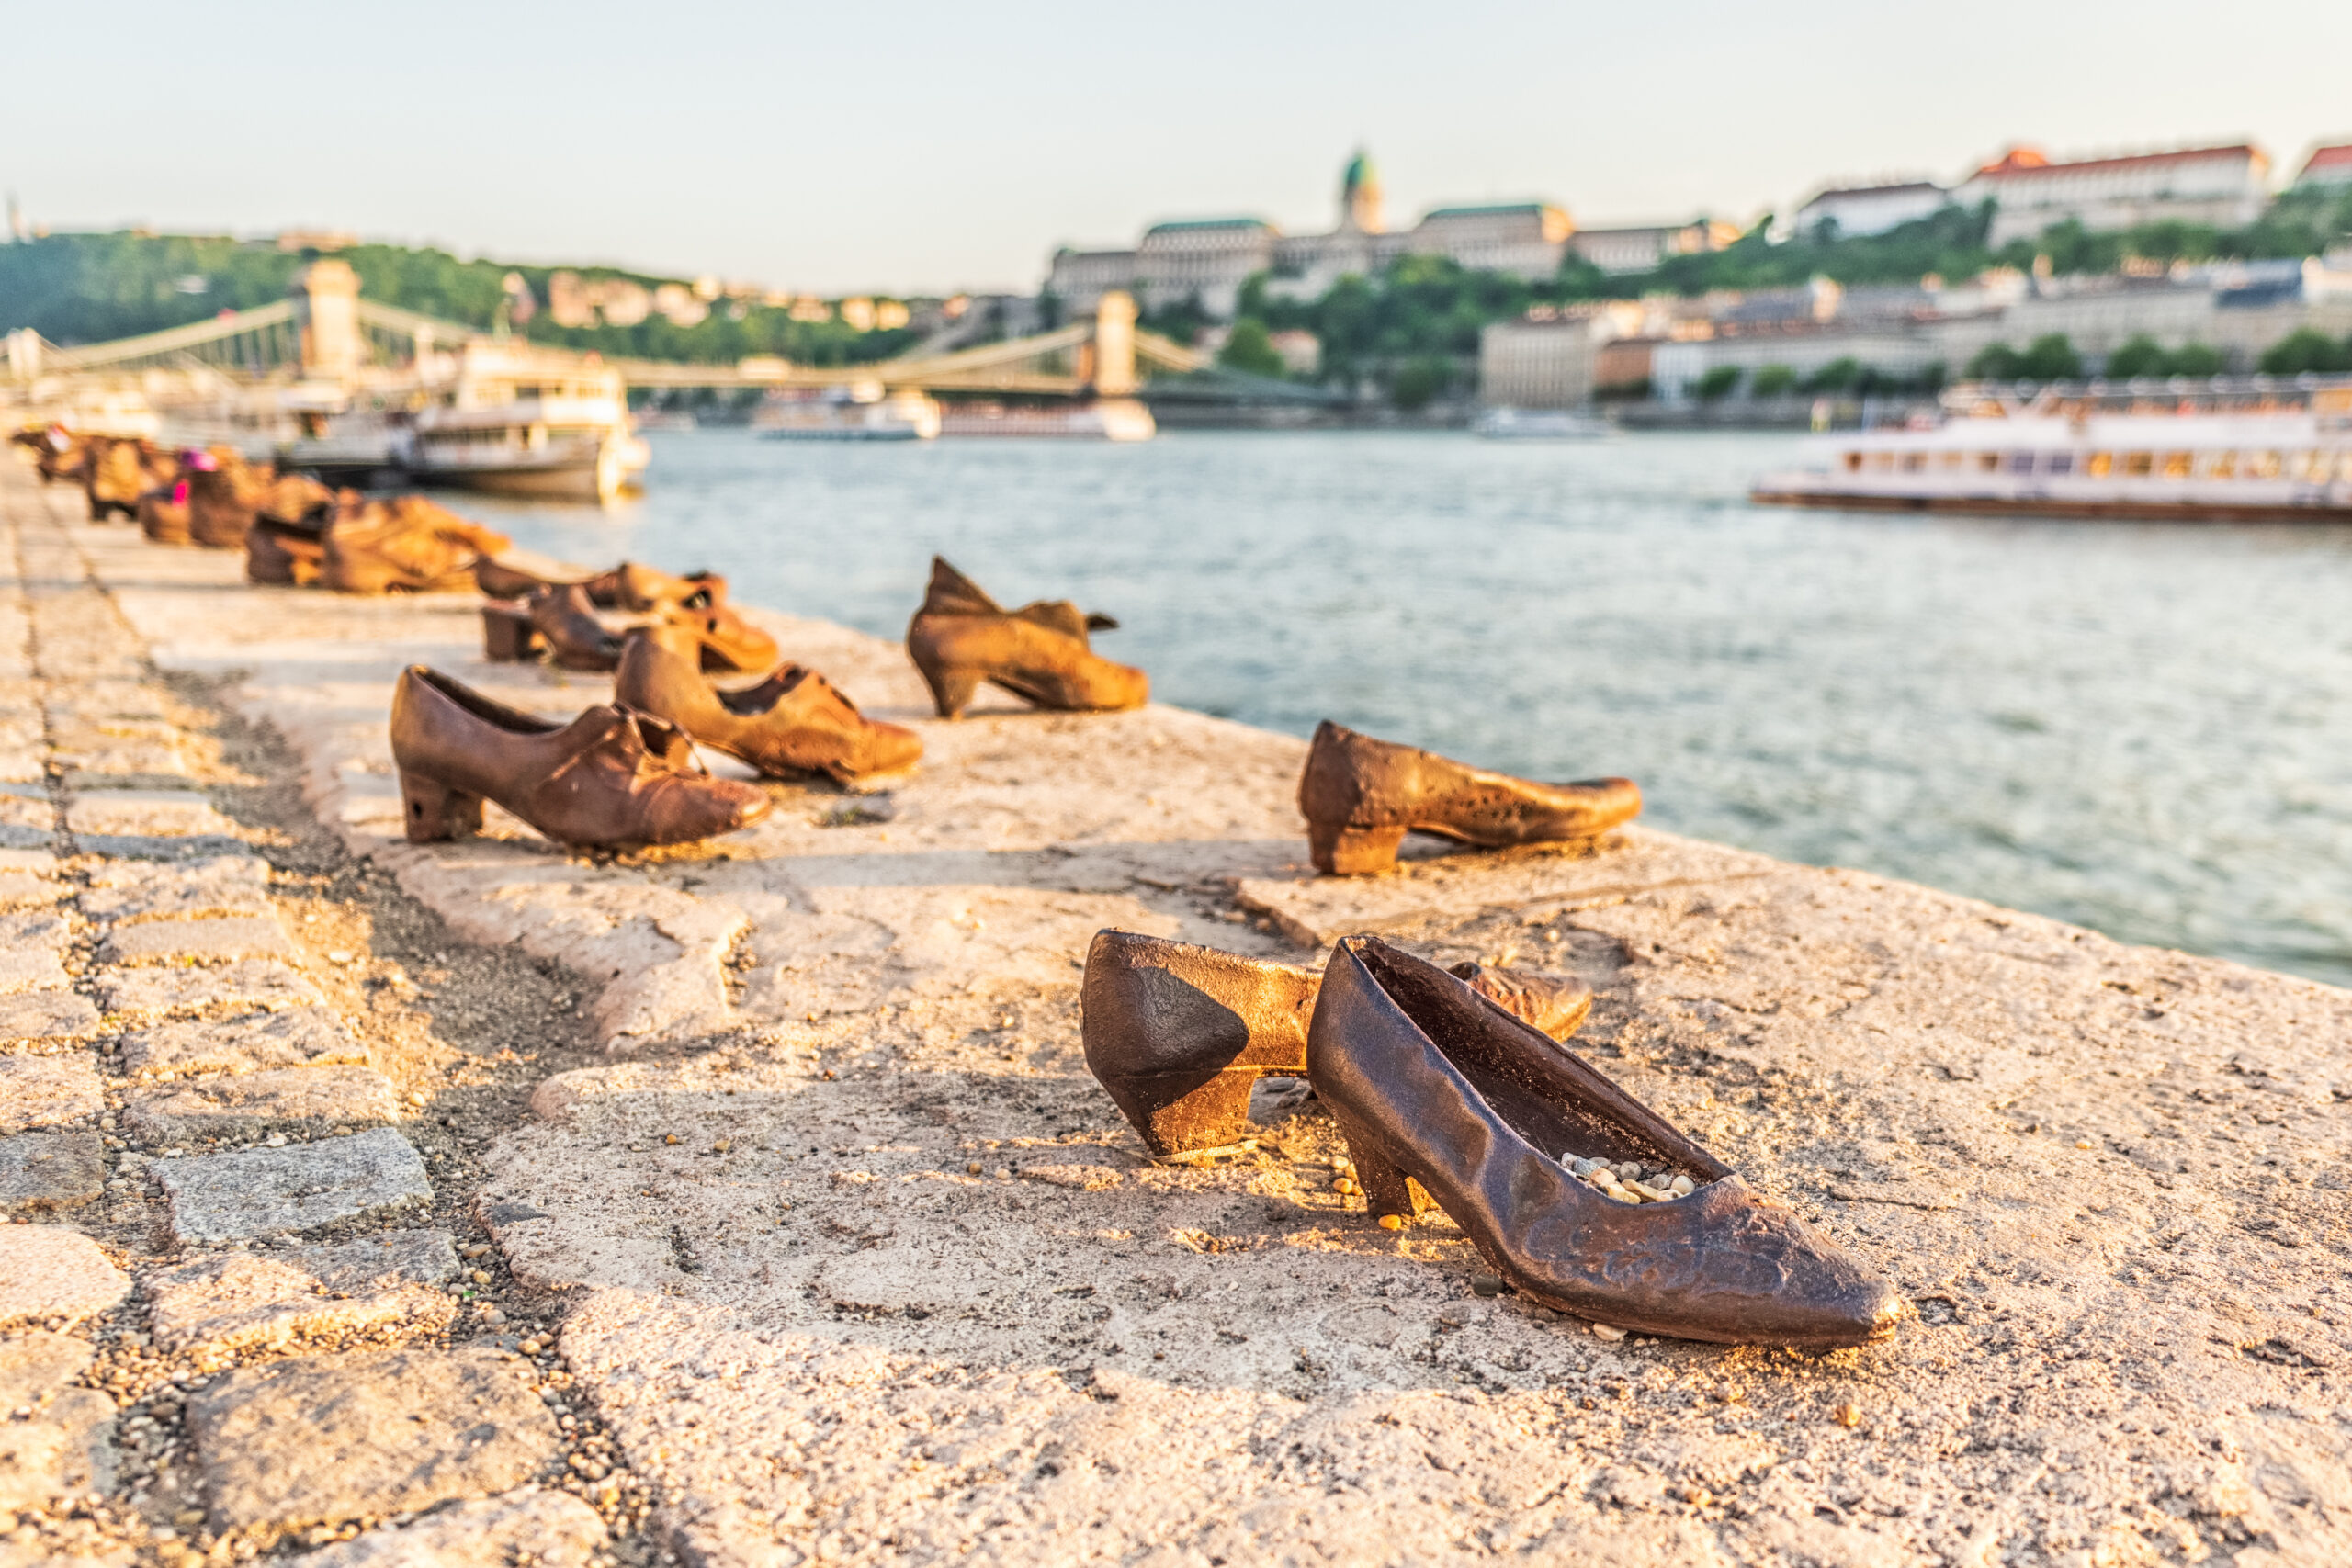 "Shoes on the Danube bank" - Monument as a memorial of the victims of the Holocaust during WWII on the bank of the Danube, Budapest, Hungary.